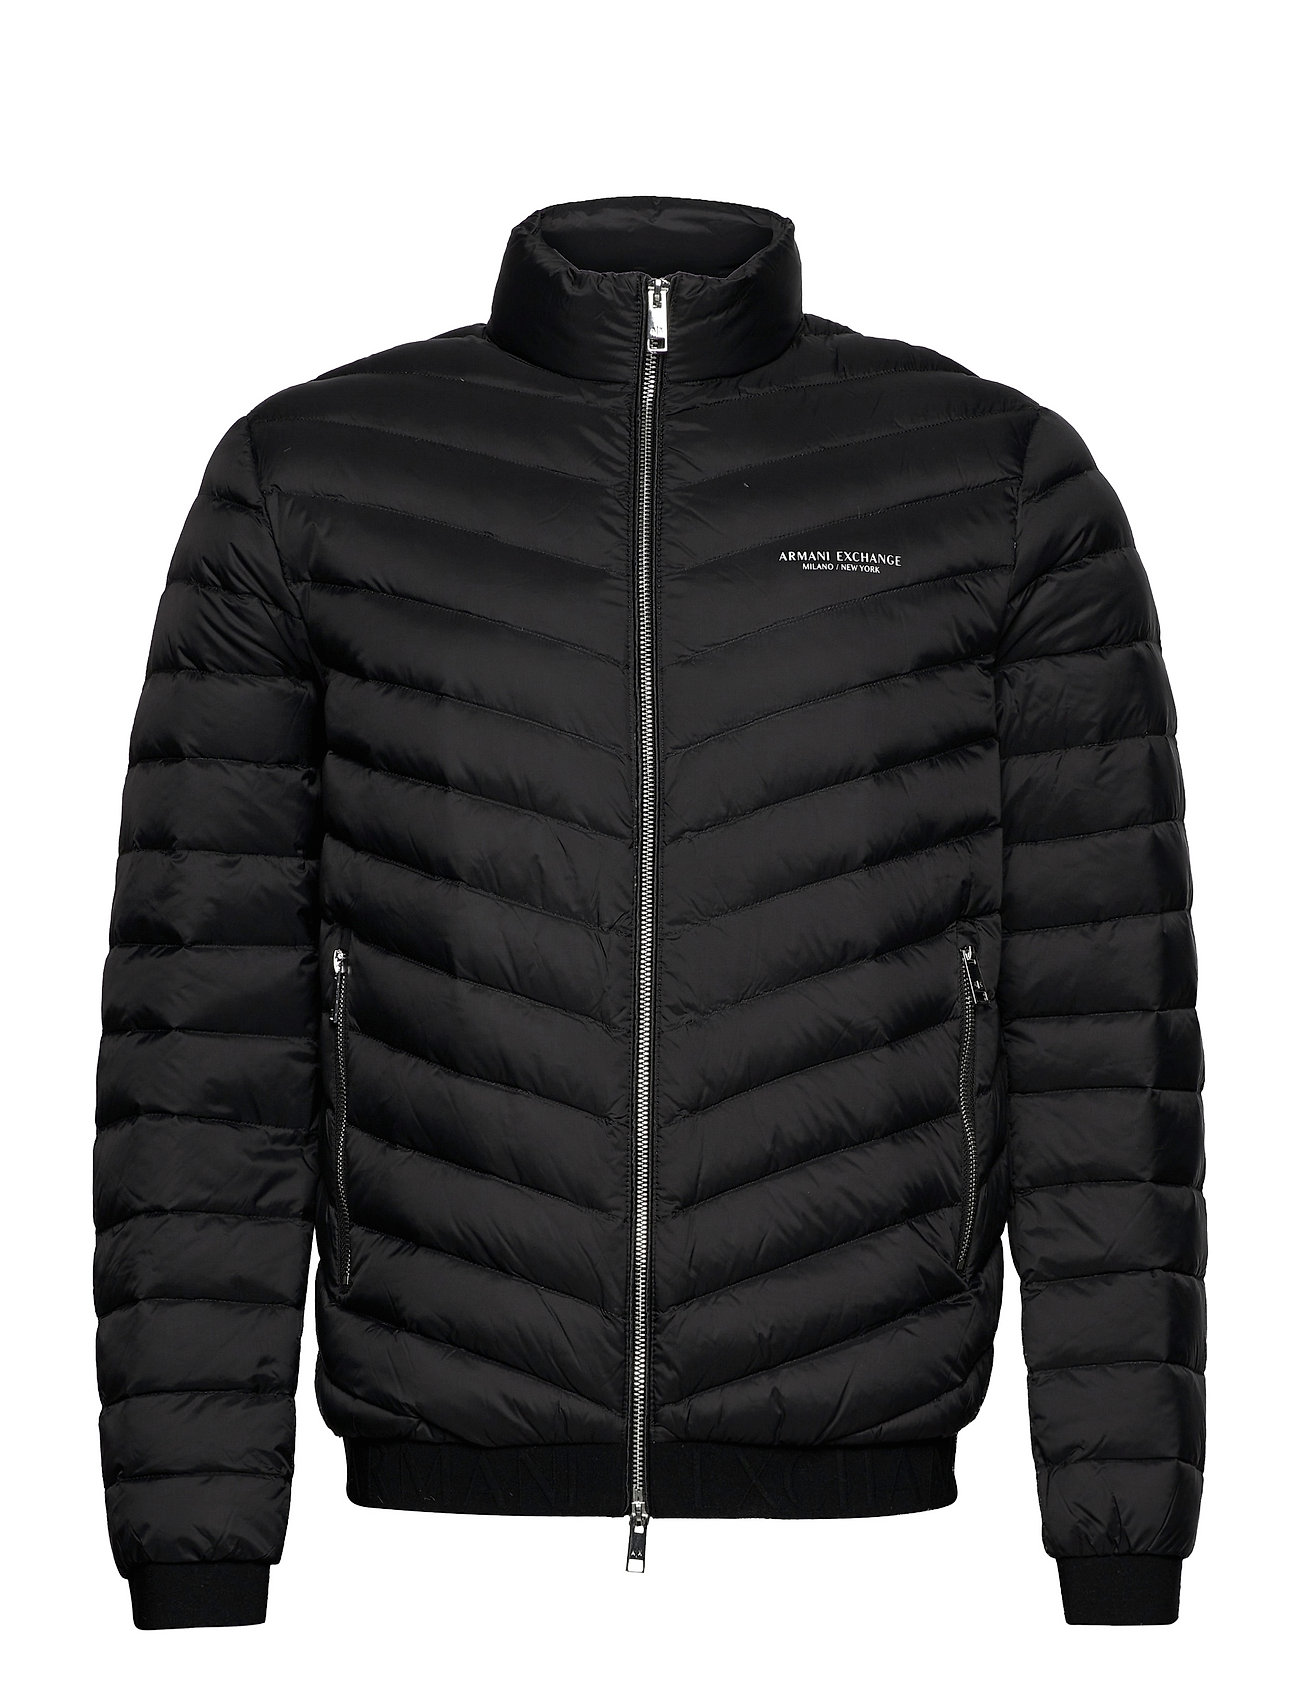 Armani Exchange Jacket - 156 €. Buy Padded jackets from Armani Exchange  online at . Fast delivery and easy returns